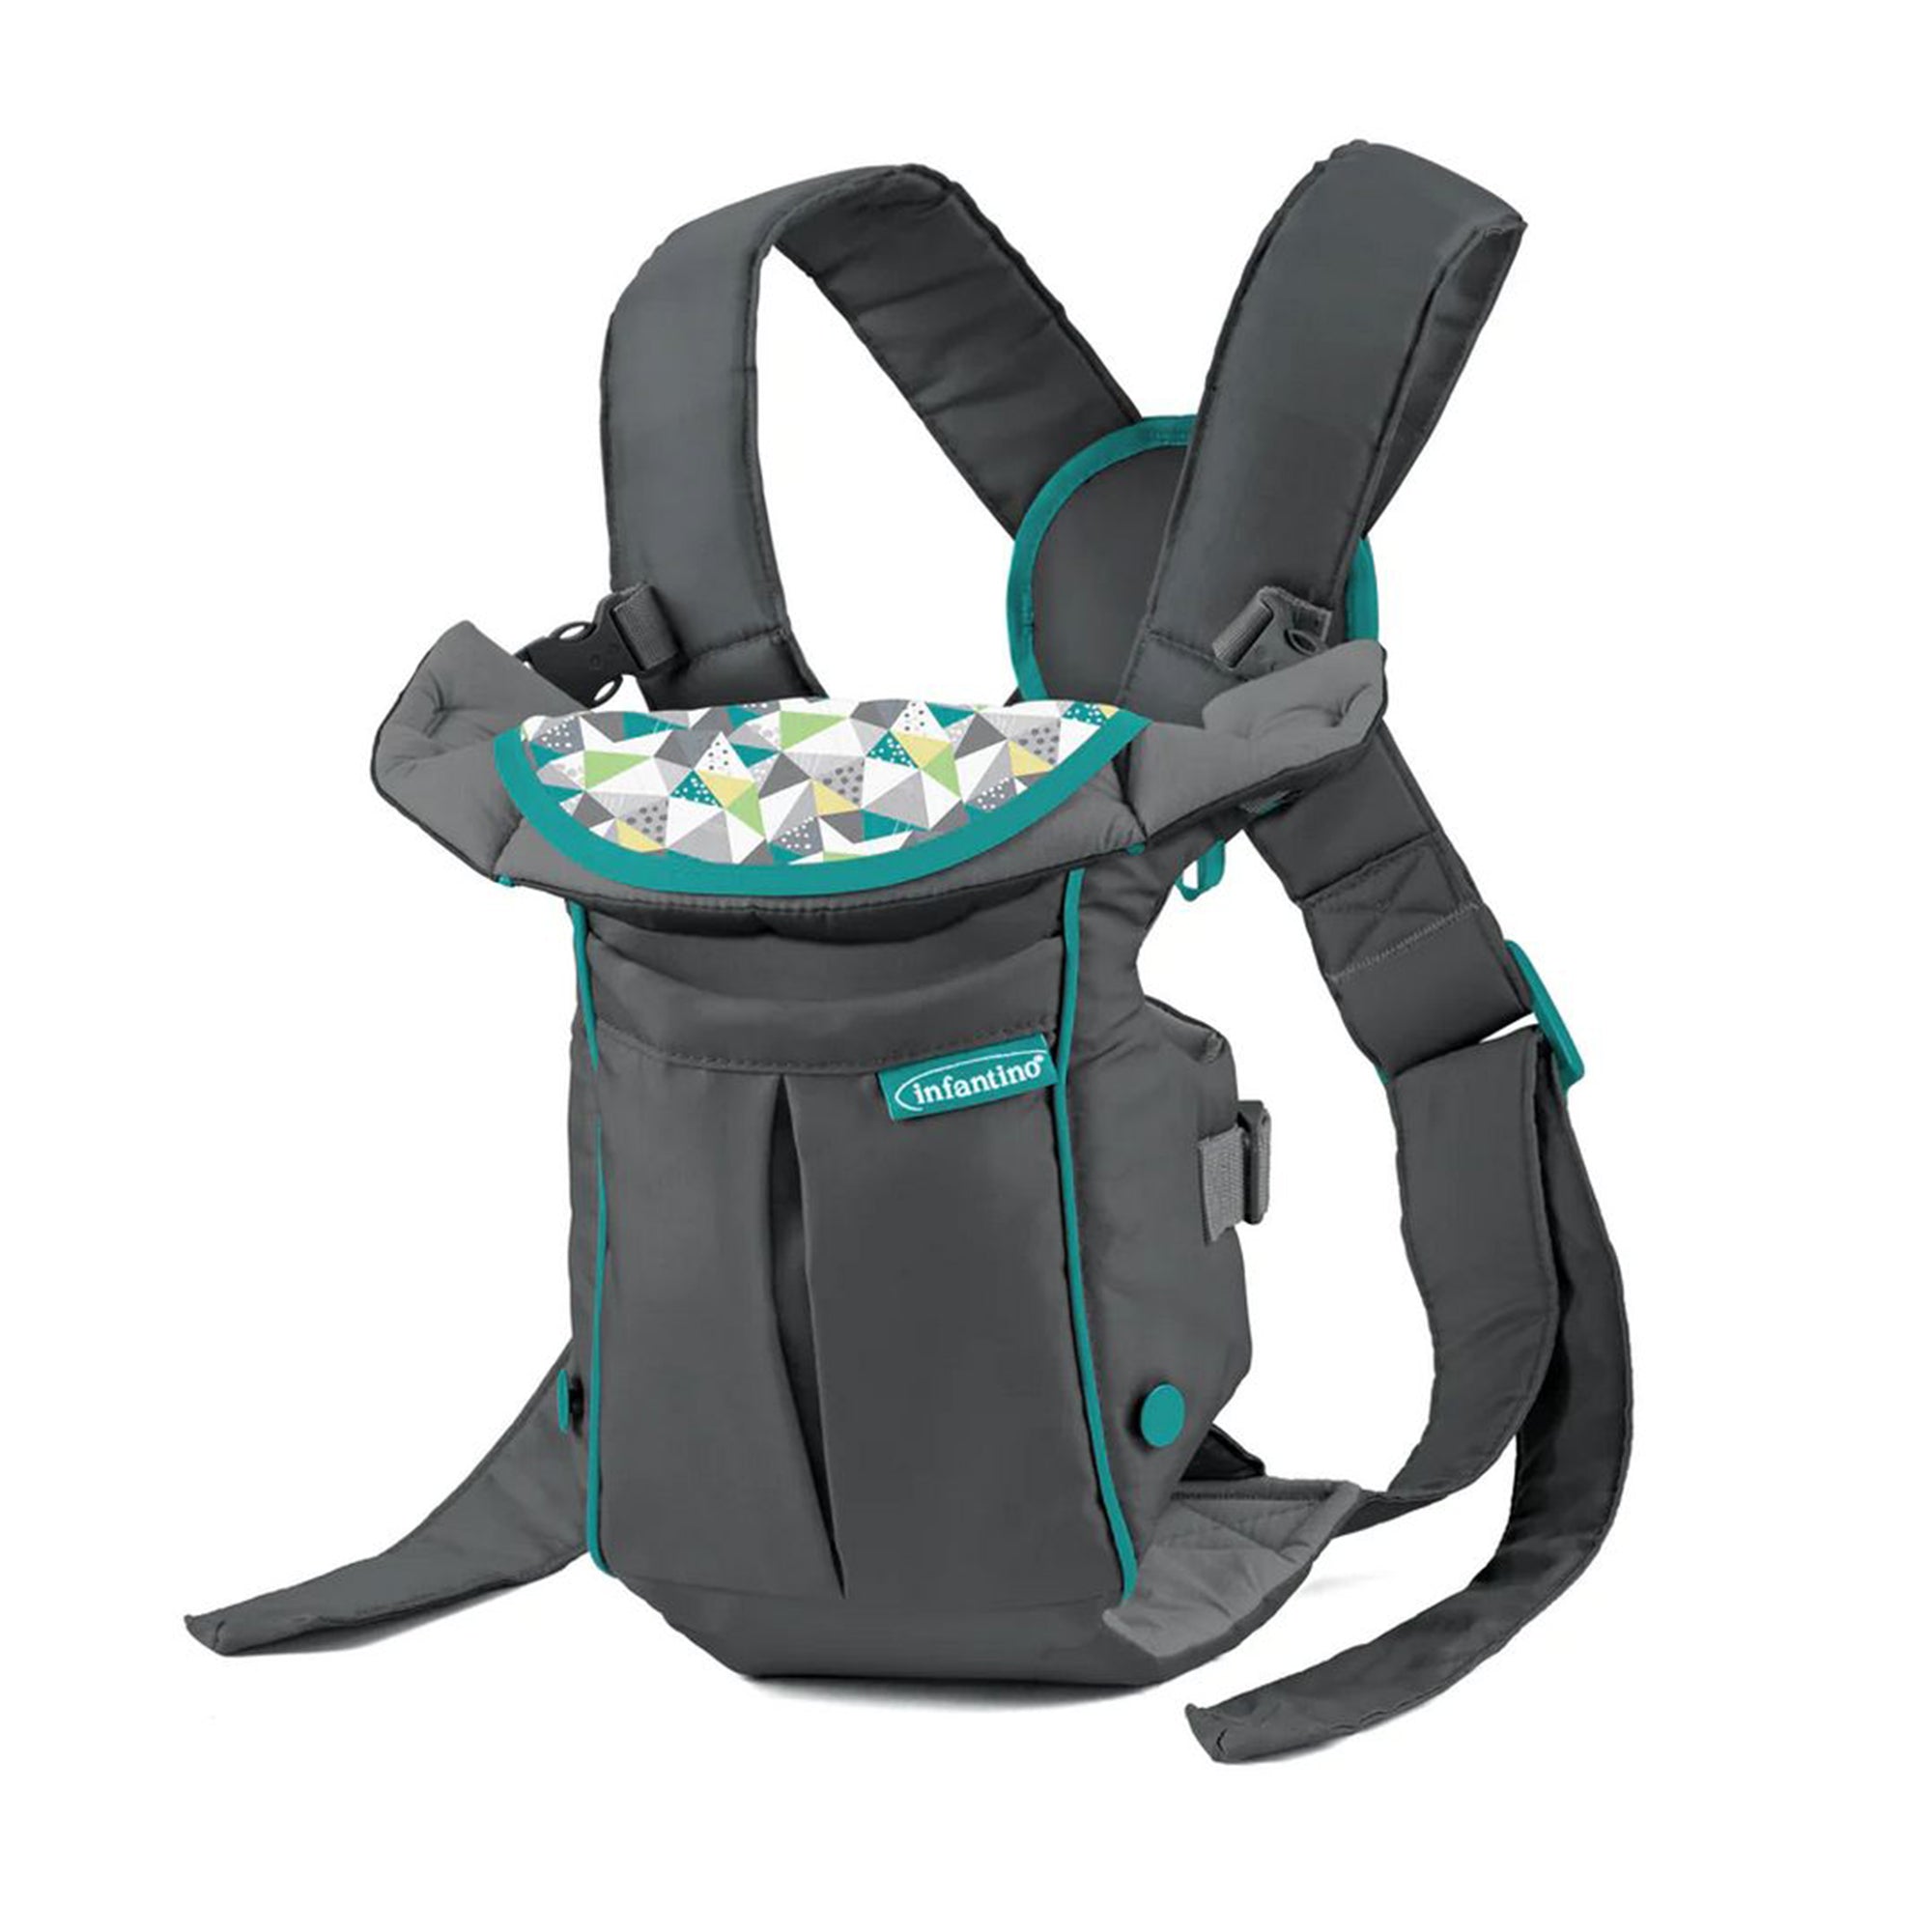 Infantino Swift Classic Carrier With Pocket - Grey - Birth to 12 Months